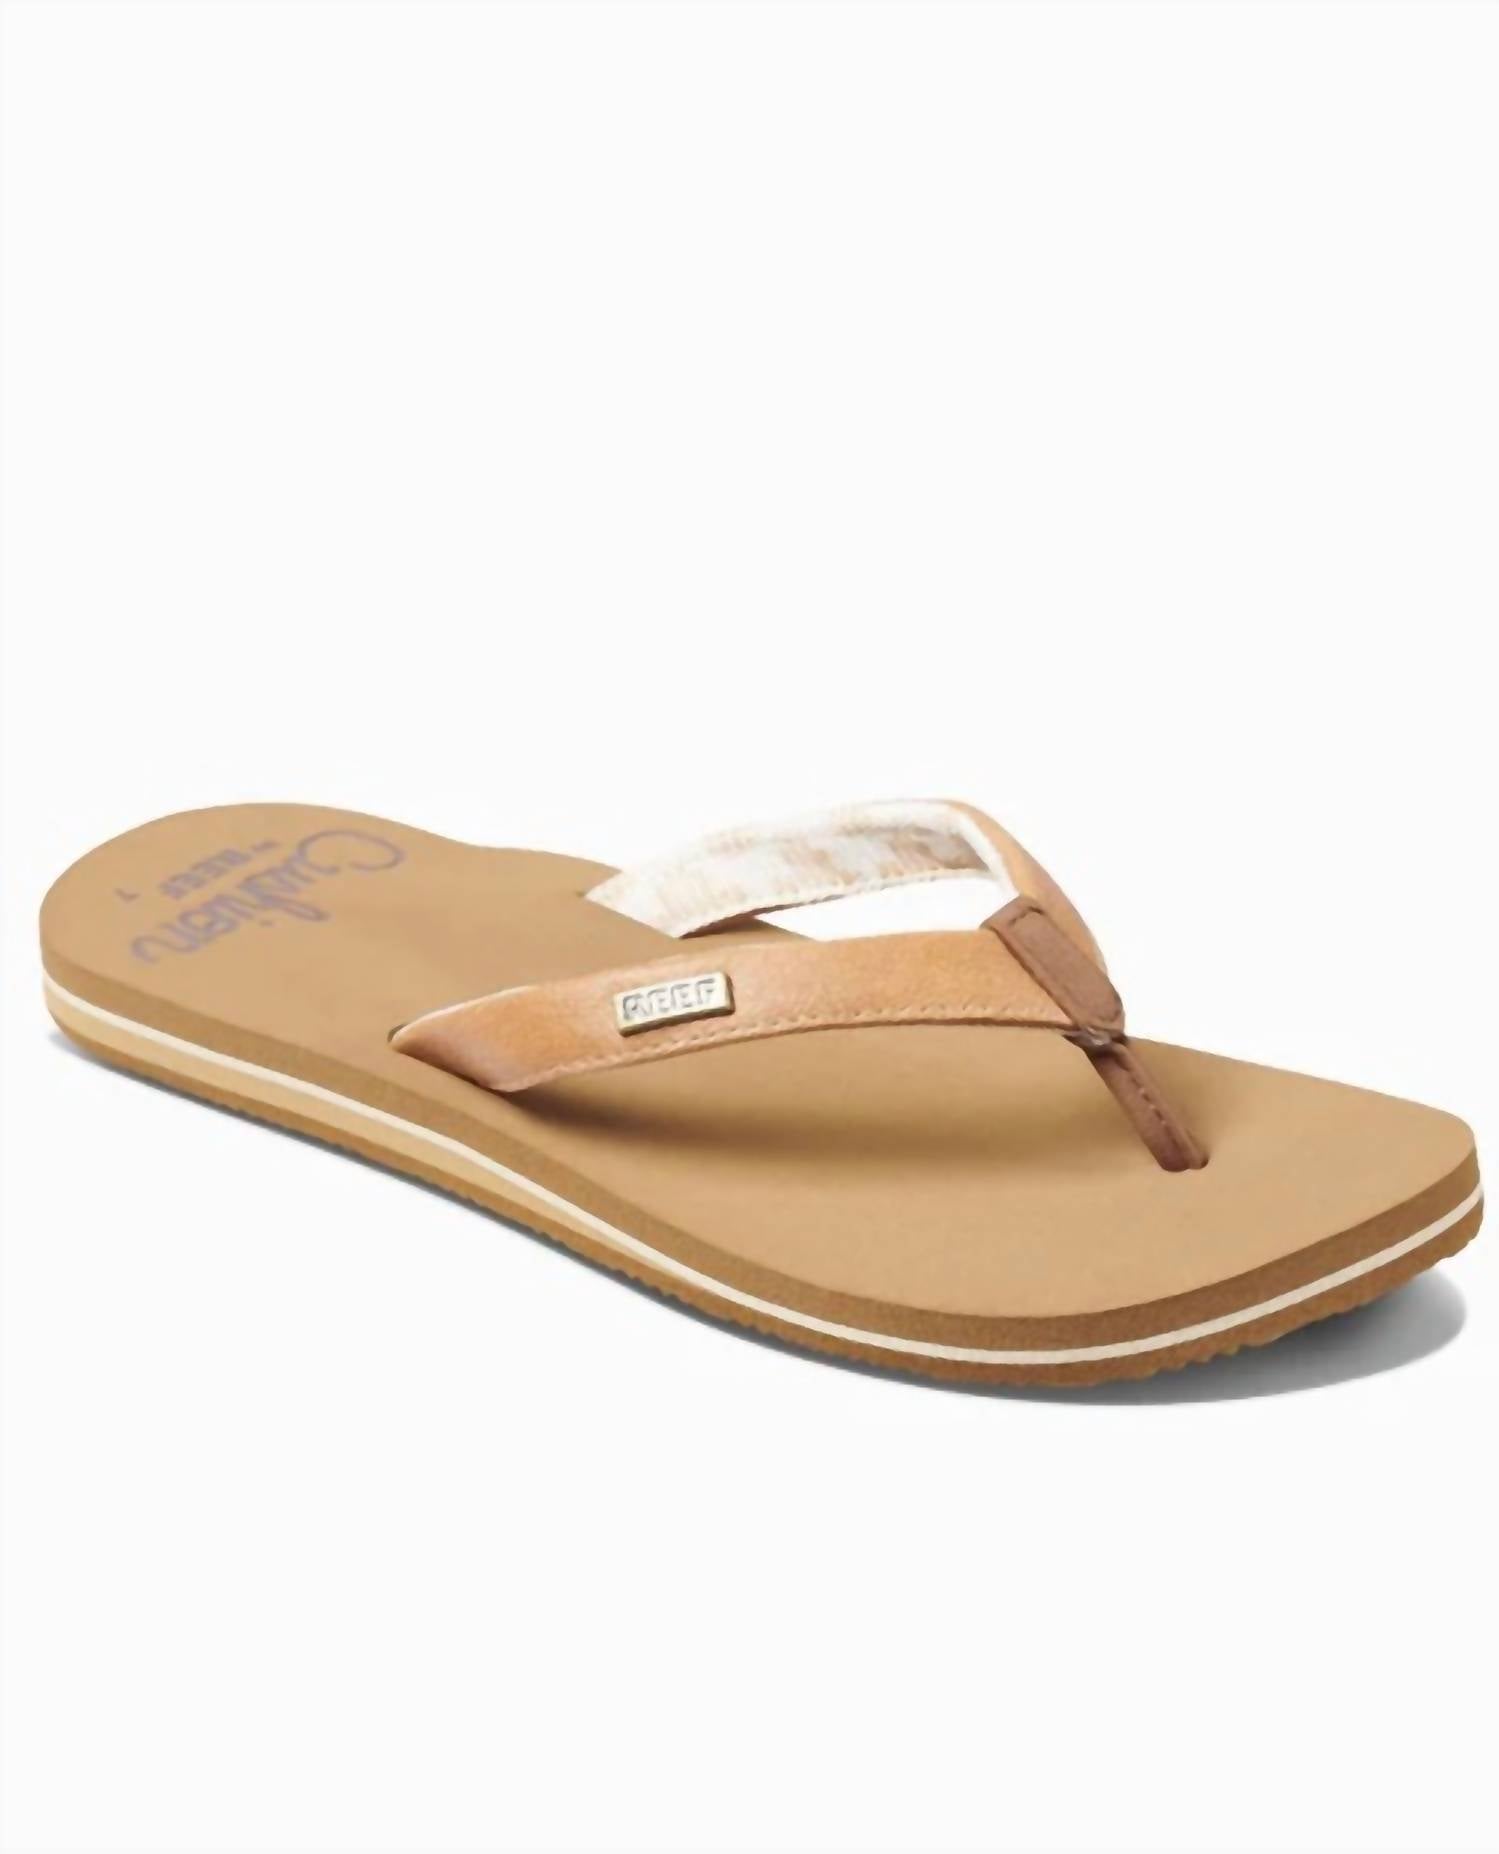 REEF Womens Cushion Sands Flip Flop in Natural